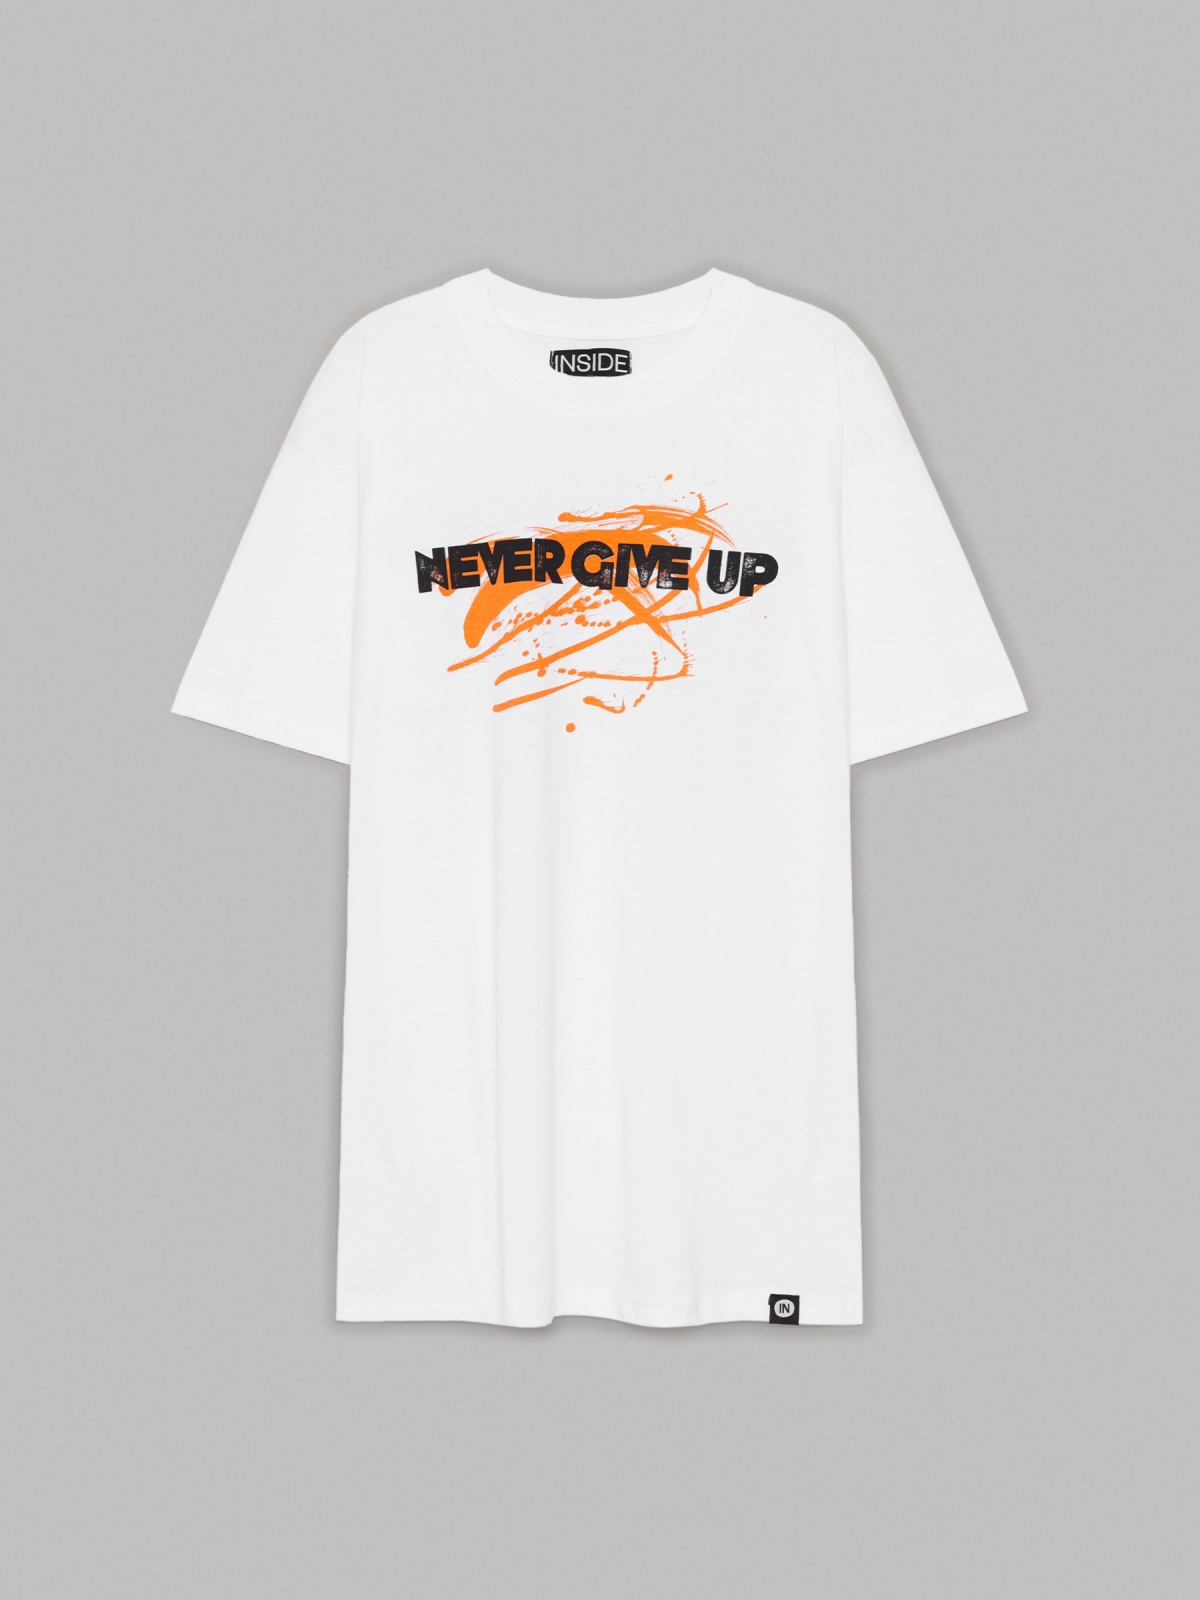  Never GiveUP T-shirt white